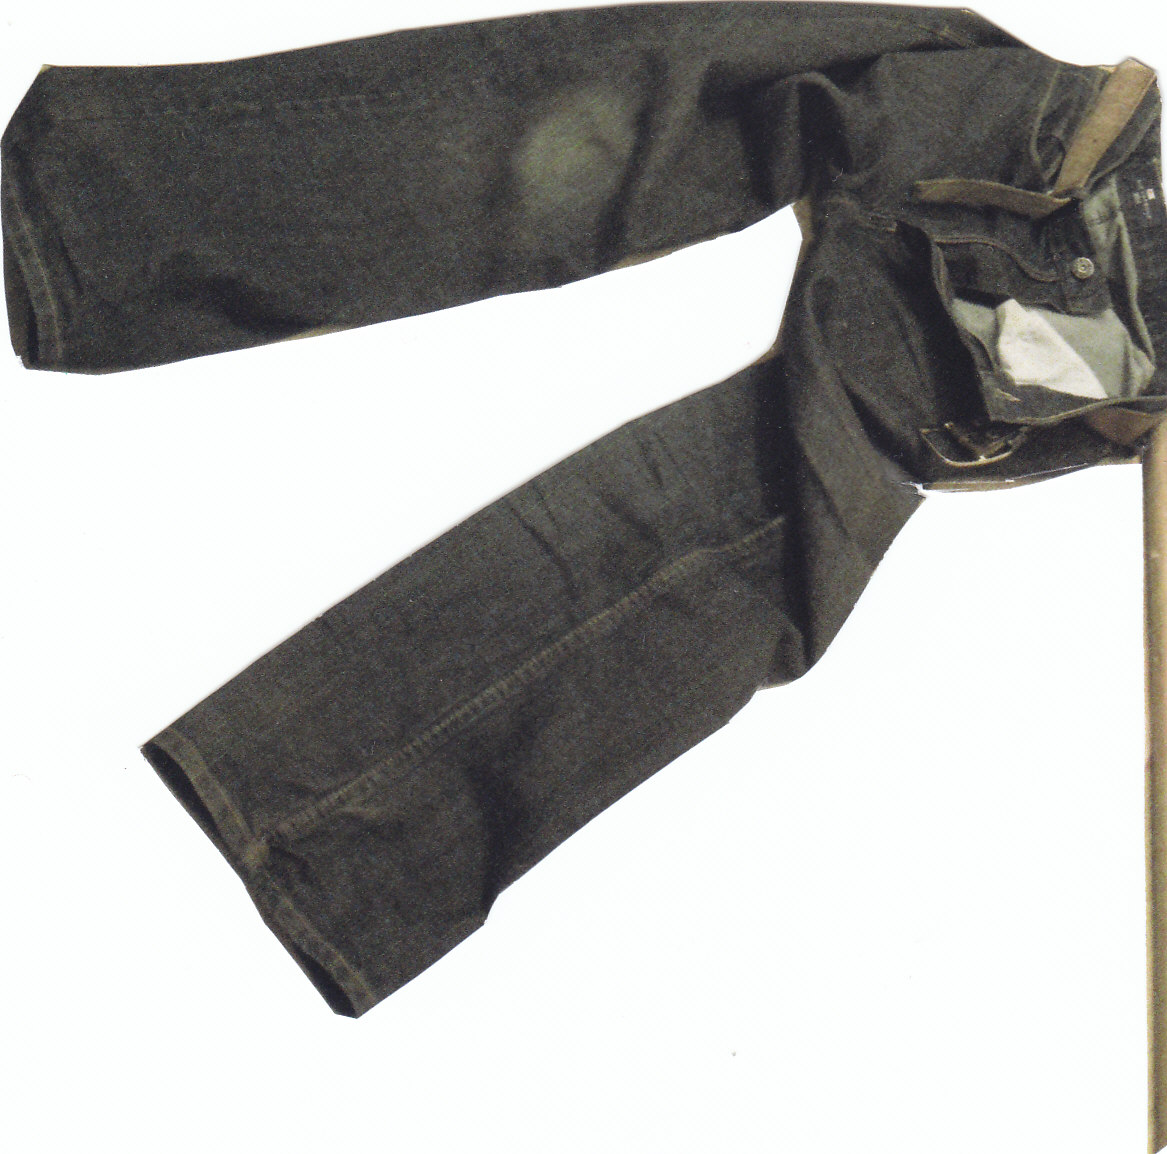 The banner: a pair of jeans on a pole